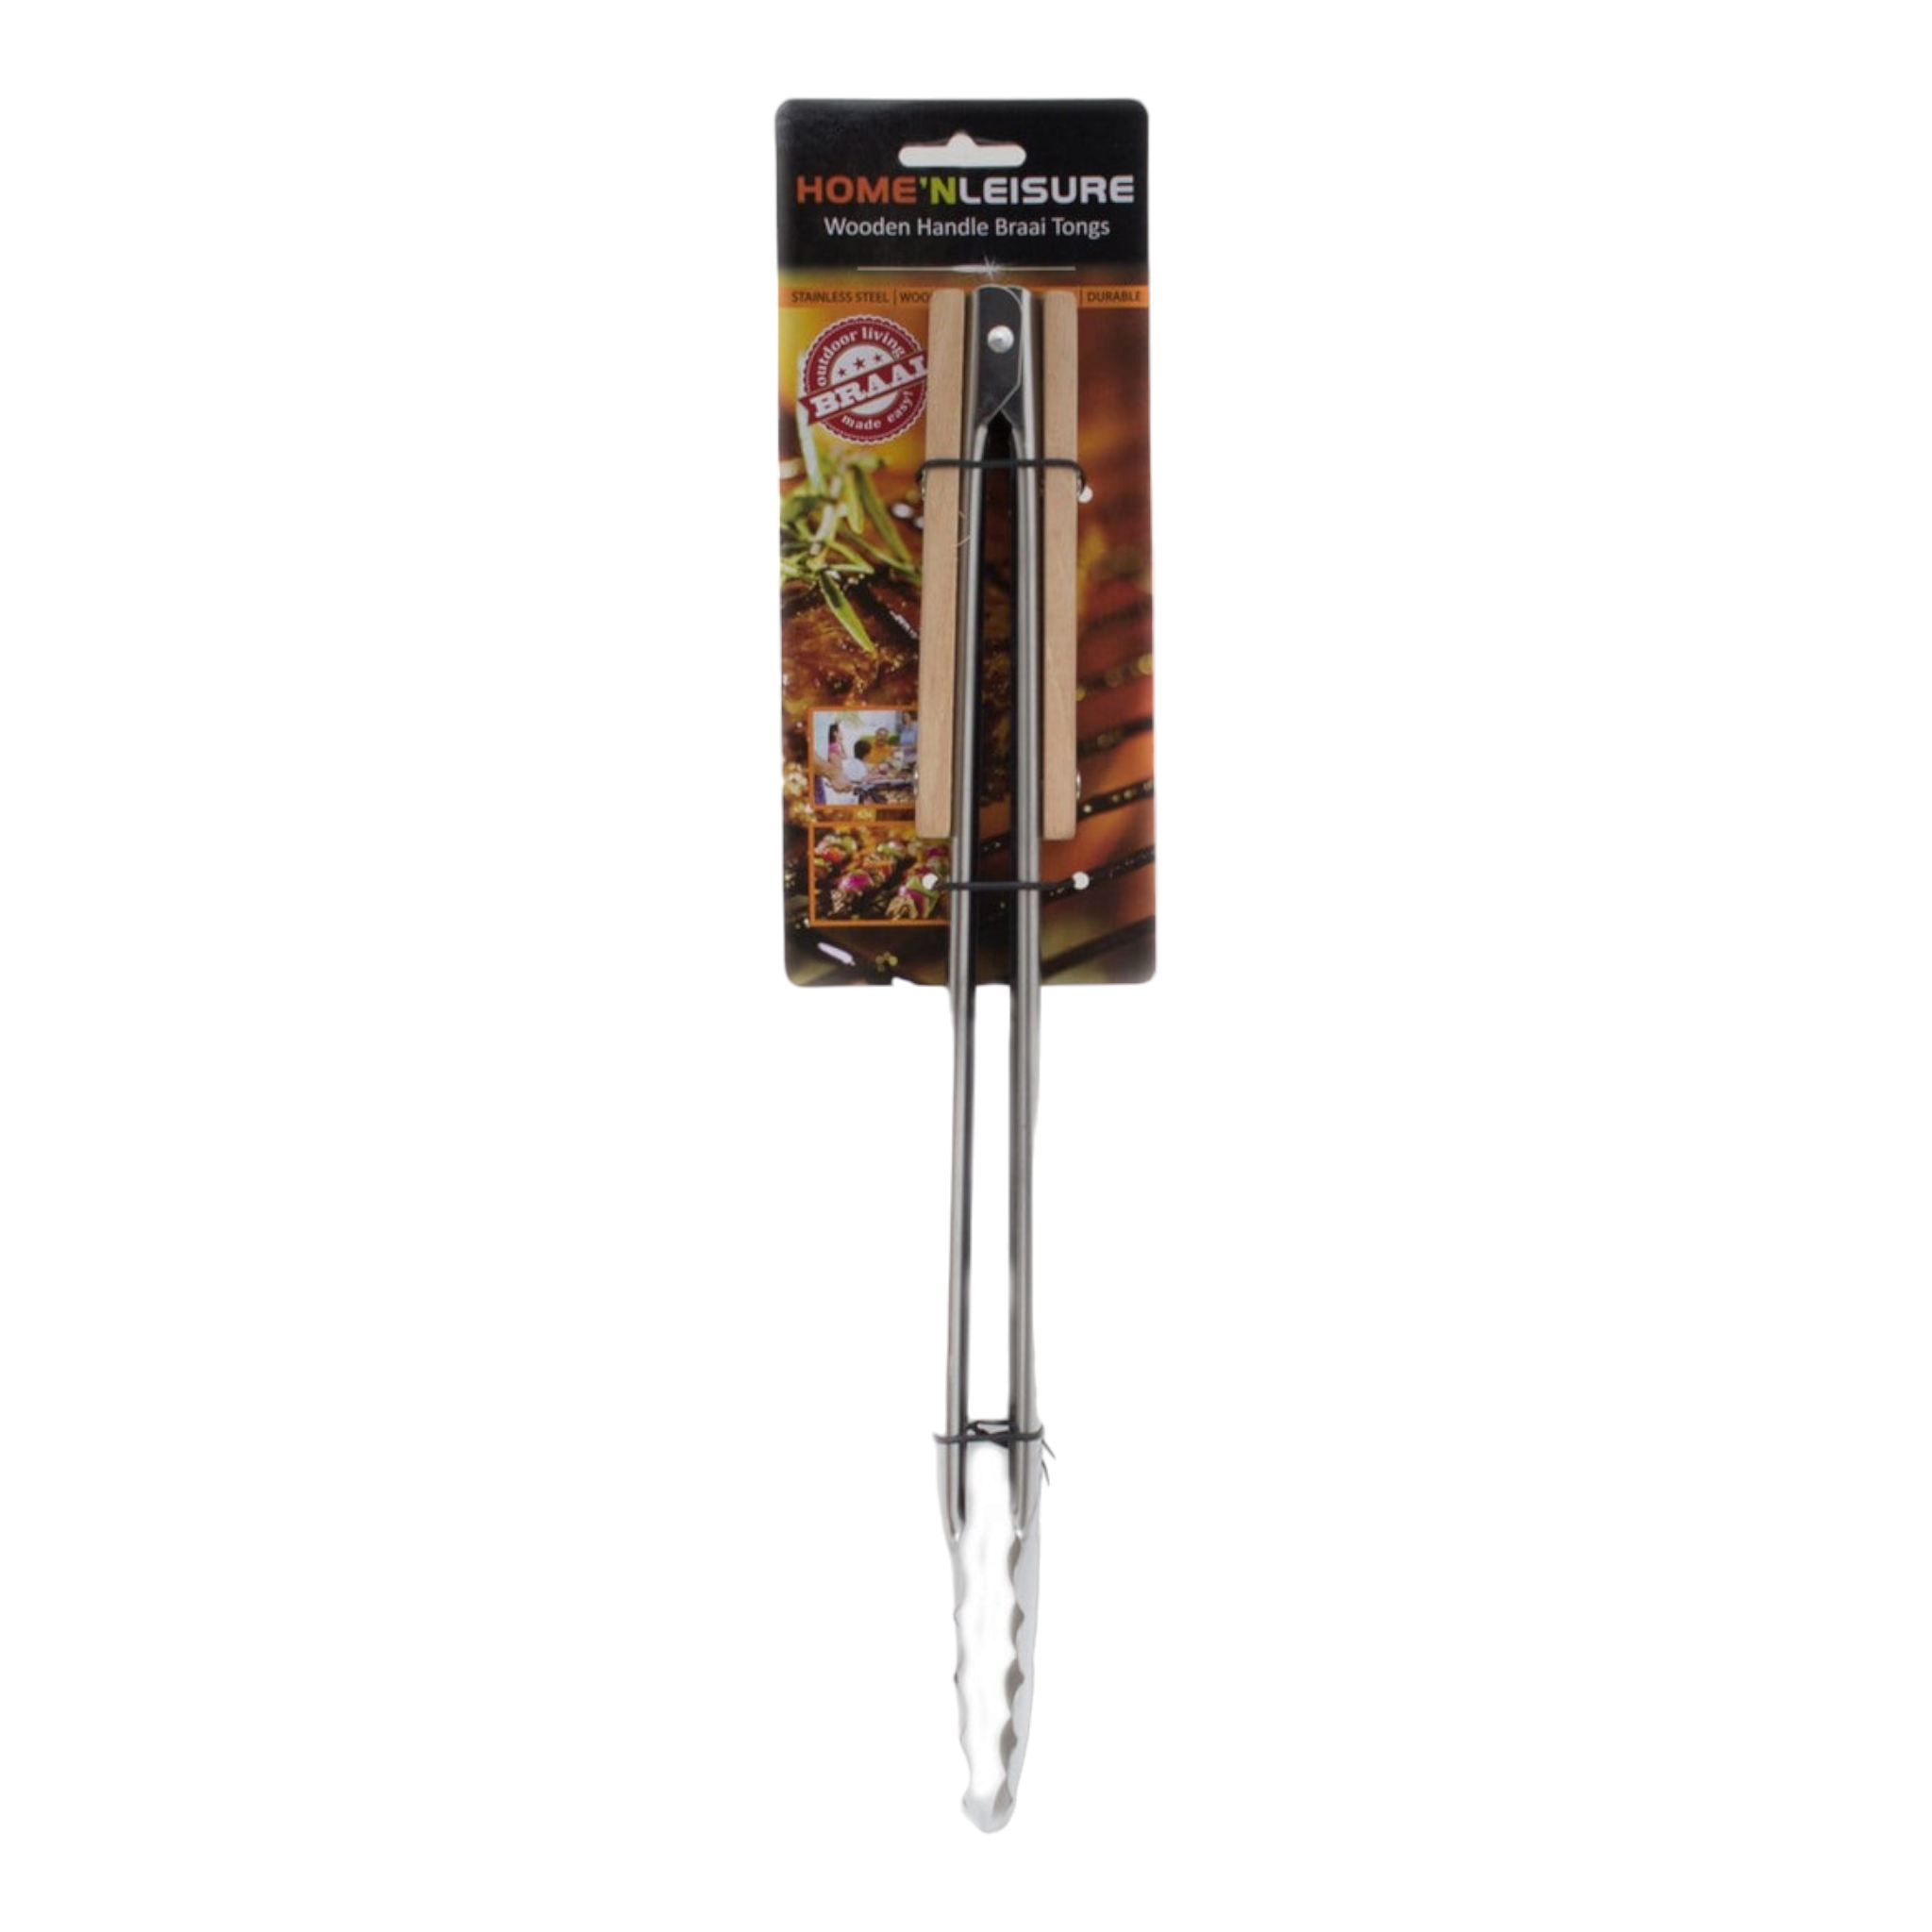 Home n Leisure BBQ Braai Tong 40mc Stainless Steel with Wooden Handle